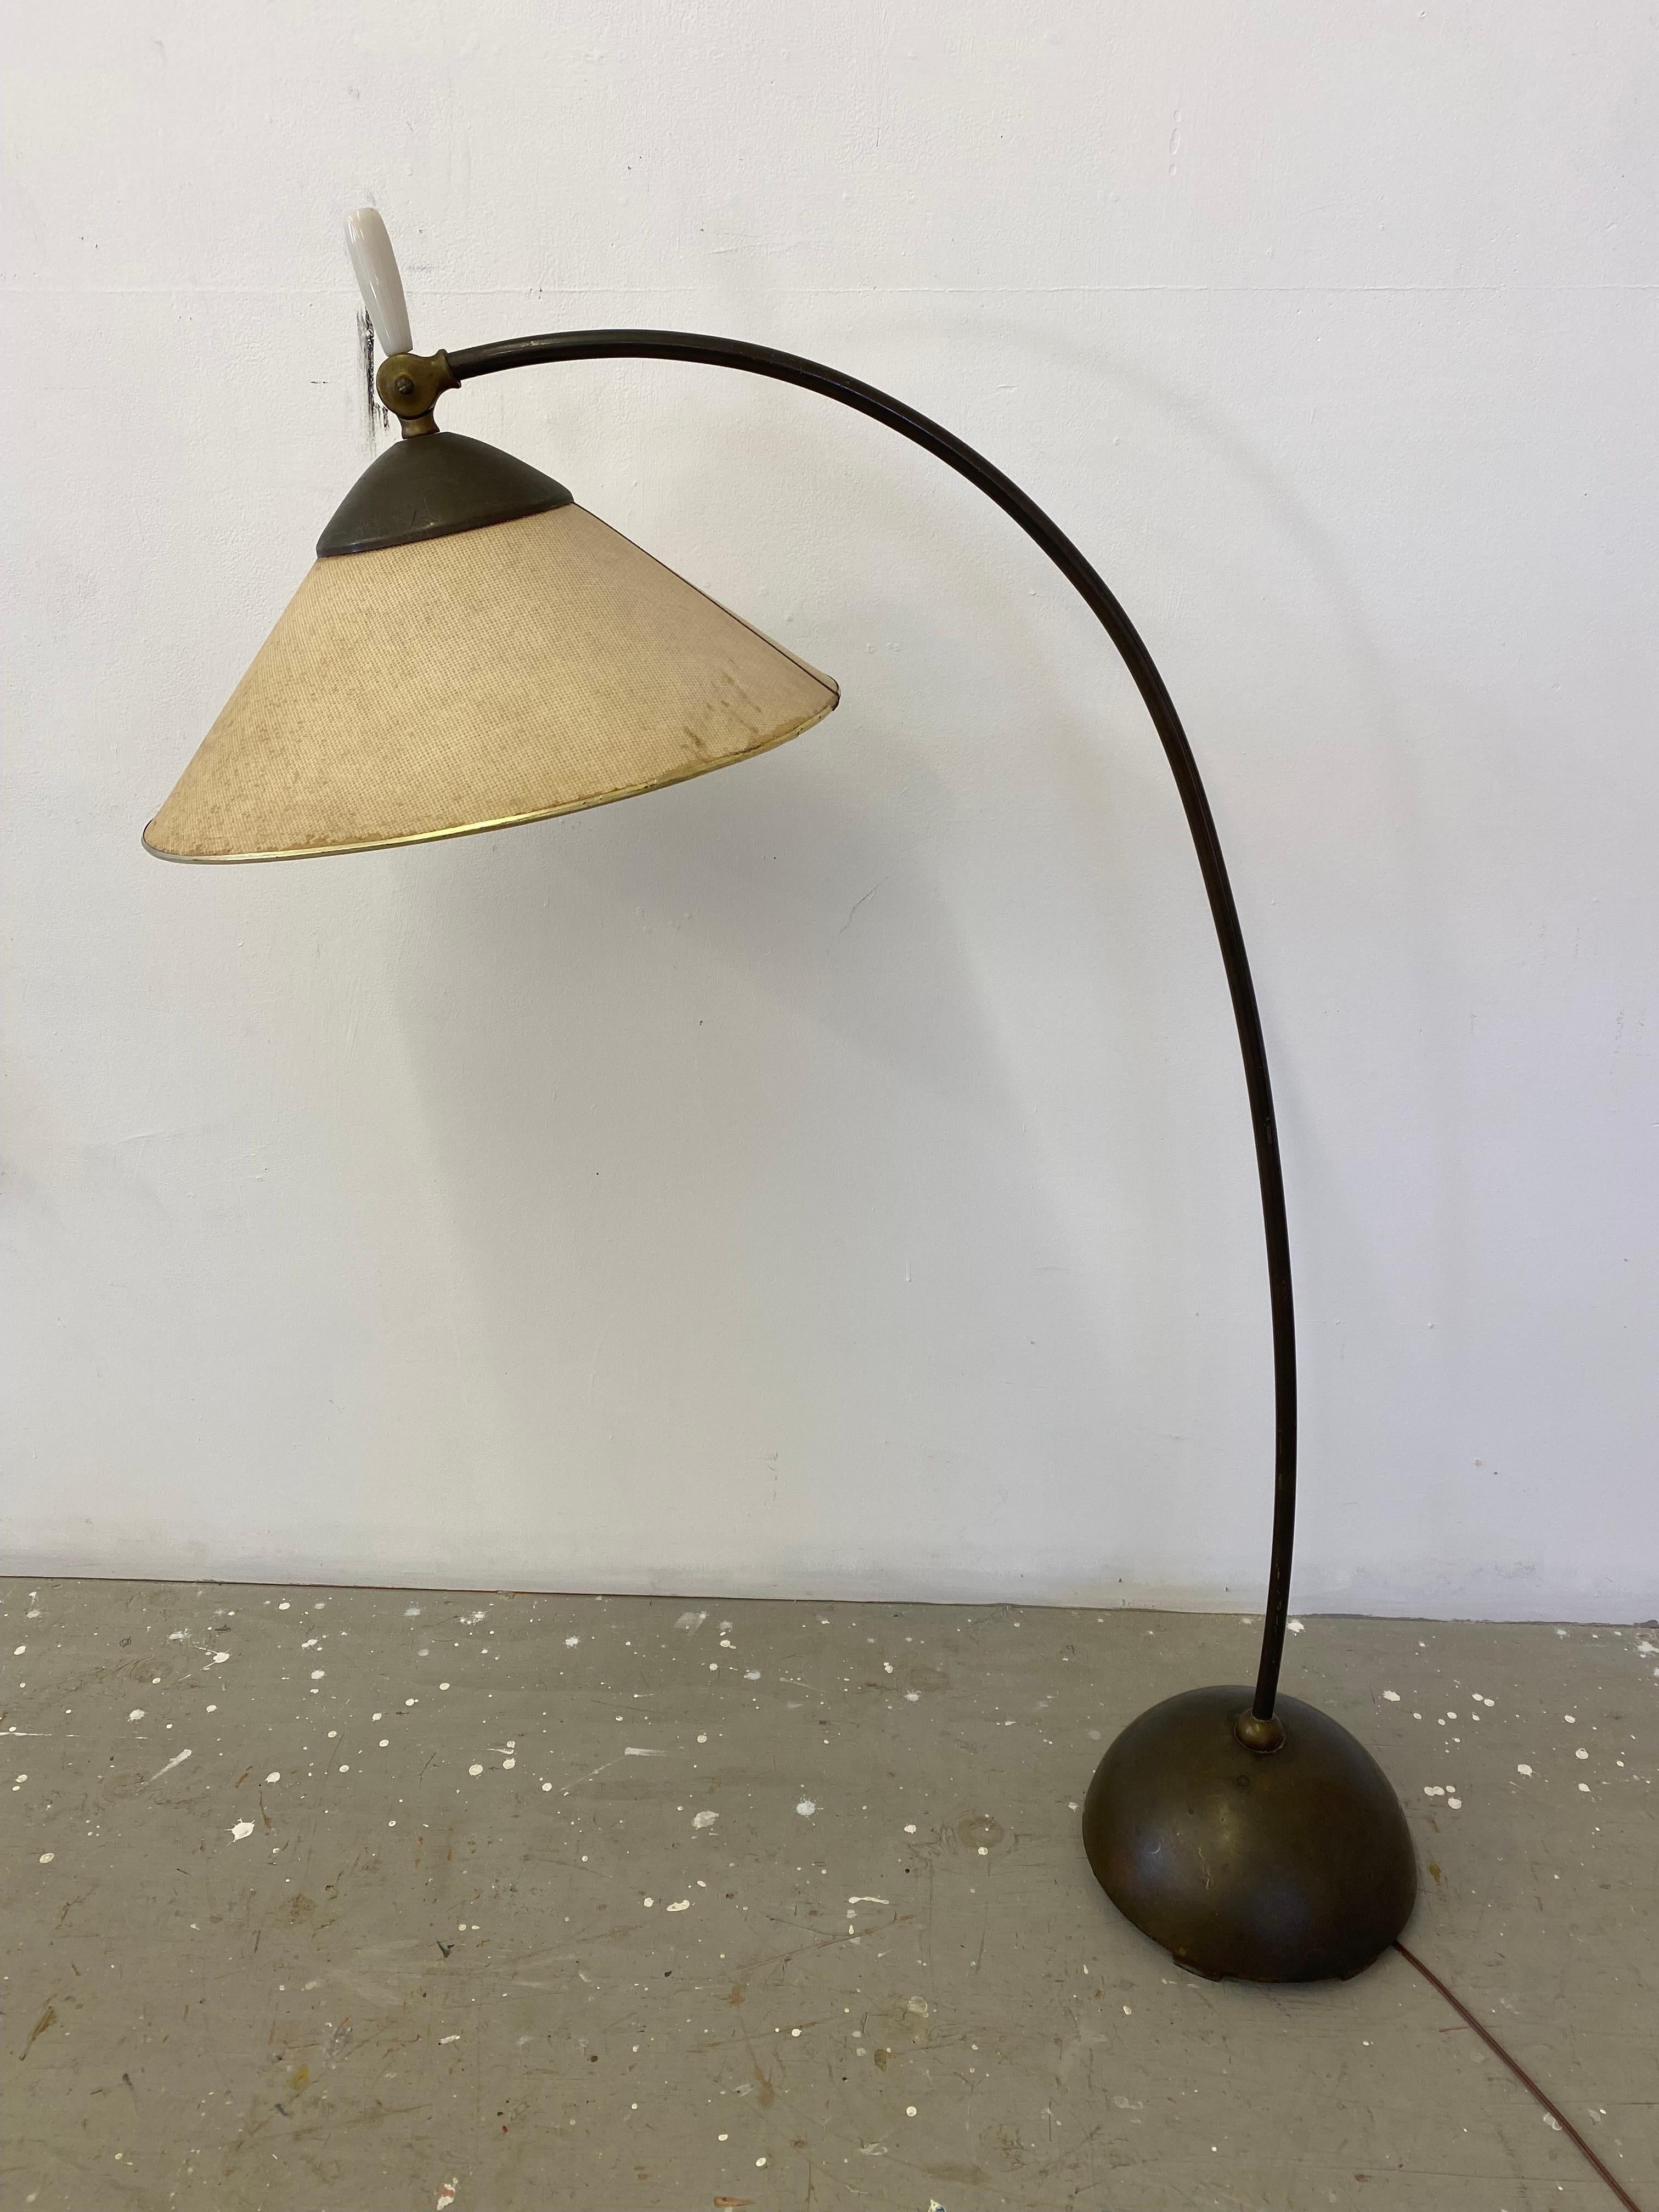 Russel Wright pivoting floor lamp for Fairmont Lamp Company, circa 1954. Amazingly very original example! Original Fiberglass shade, original paint and patina on brass! Lamp moves in a multitude of positions to direct the light to every angle! Lamp